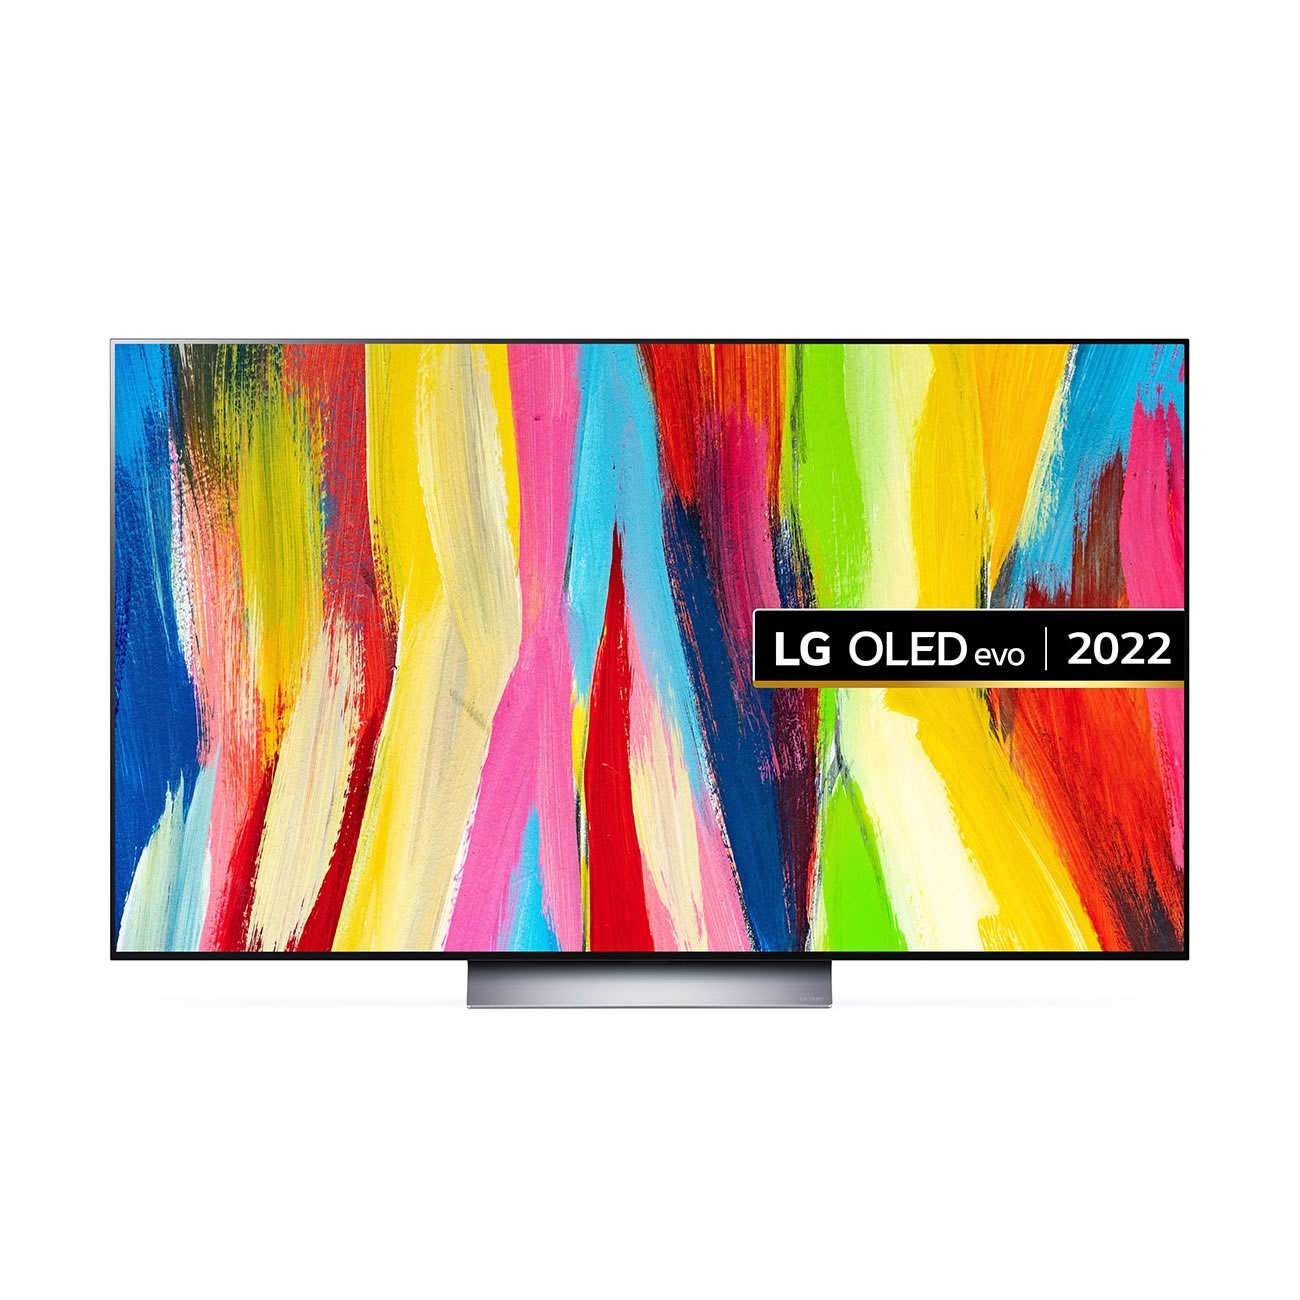 LG 42inch OLED HDR 4K UHD SMART TV WiFi Dolby Atmos